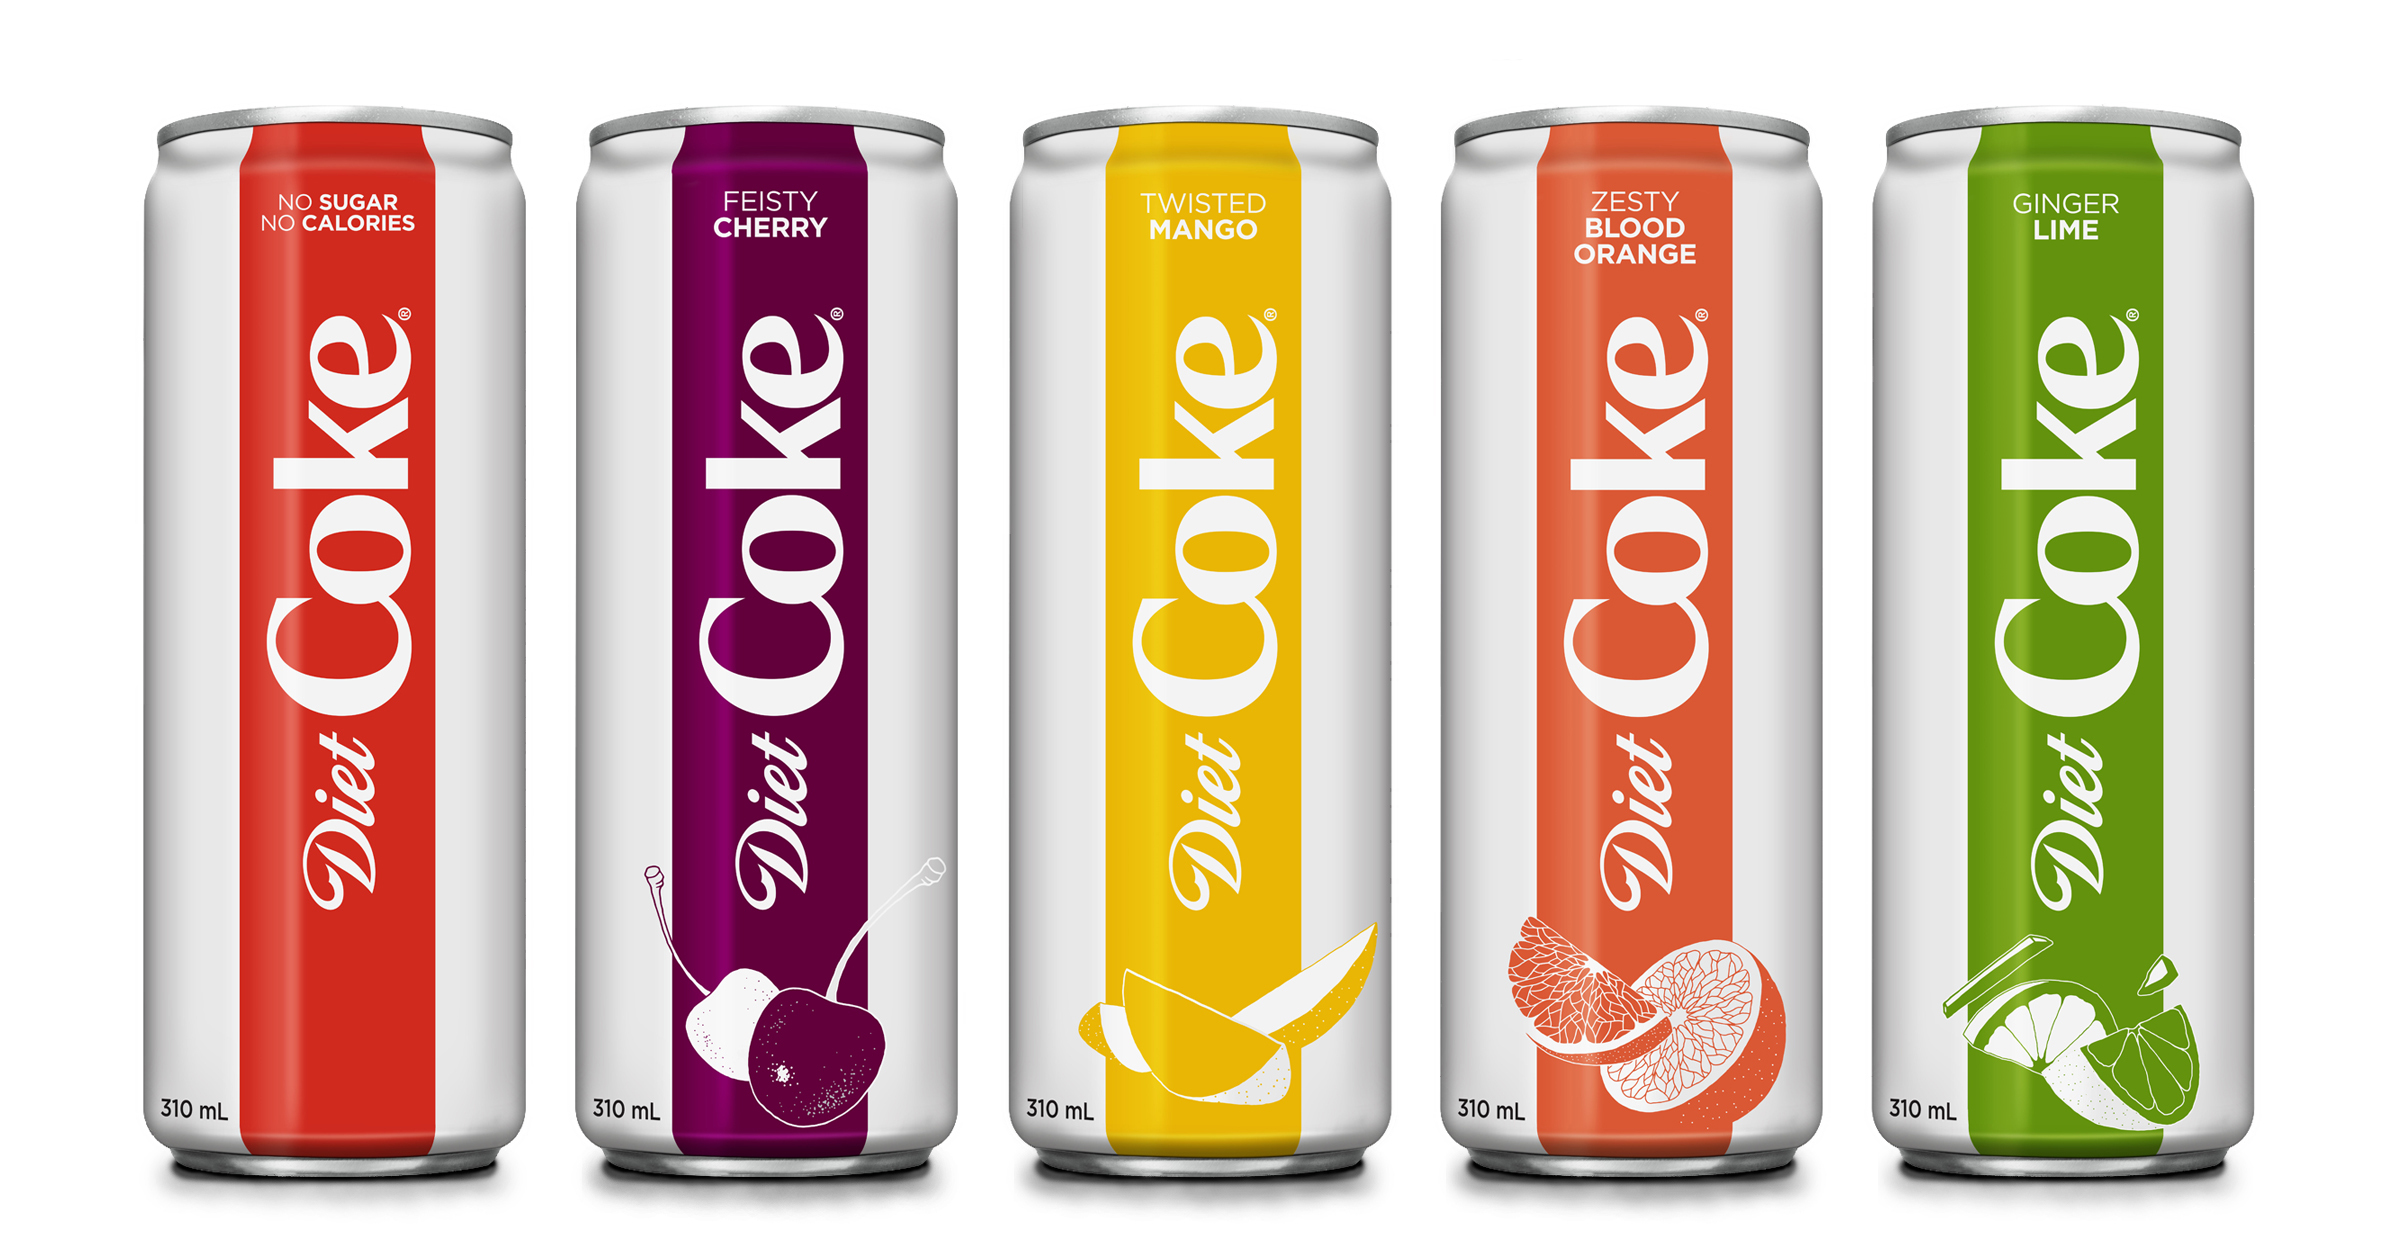 Coke is giving one of its most popular drinks a makeover